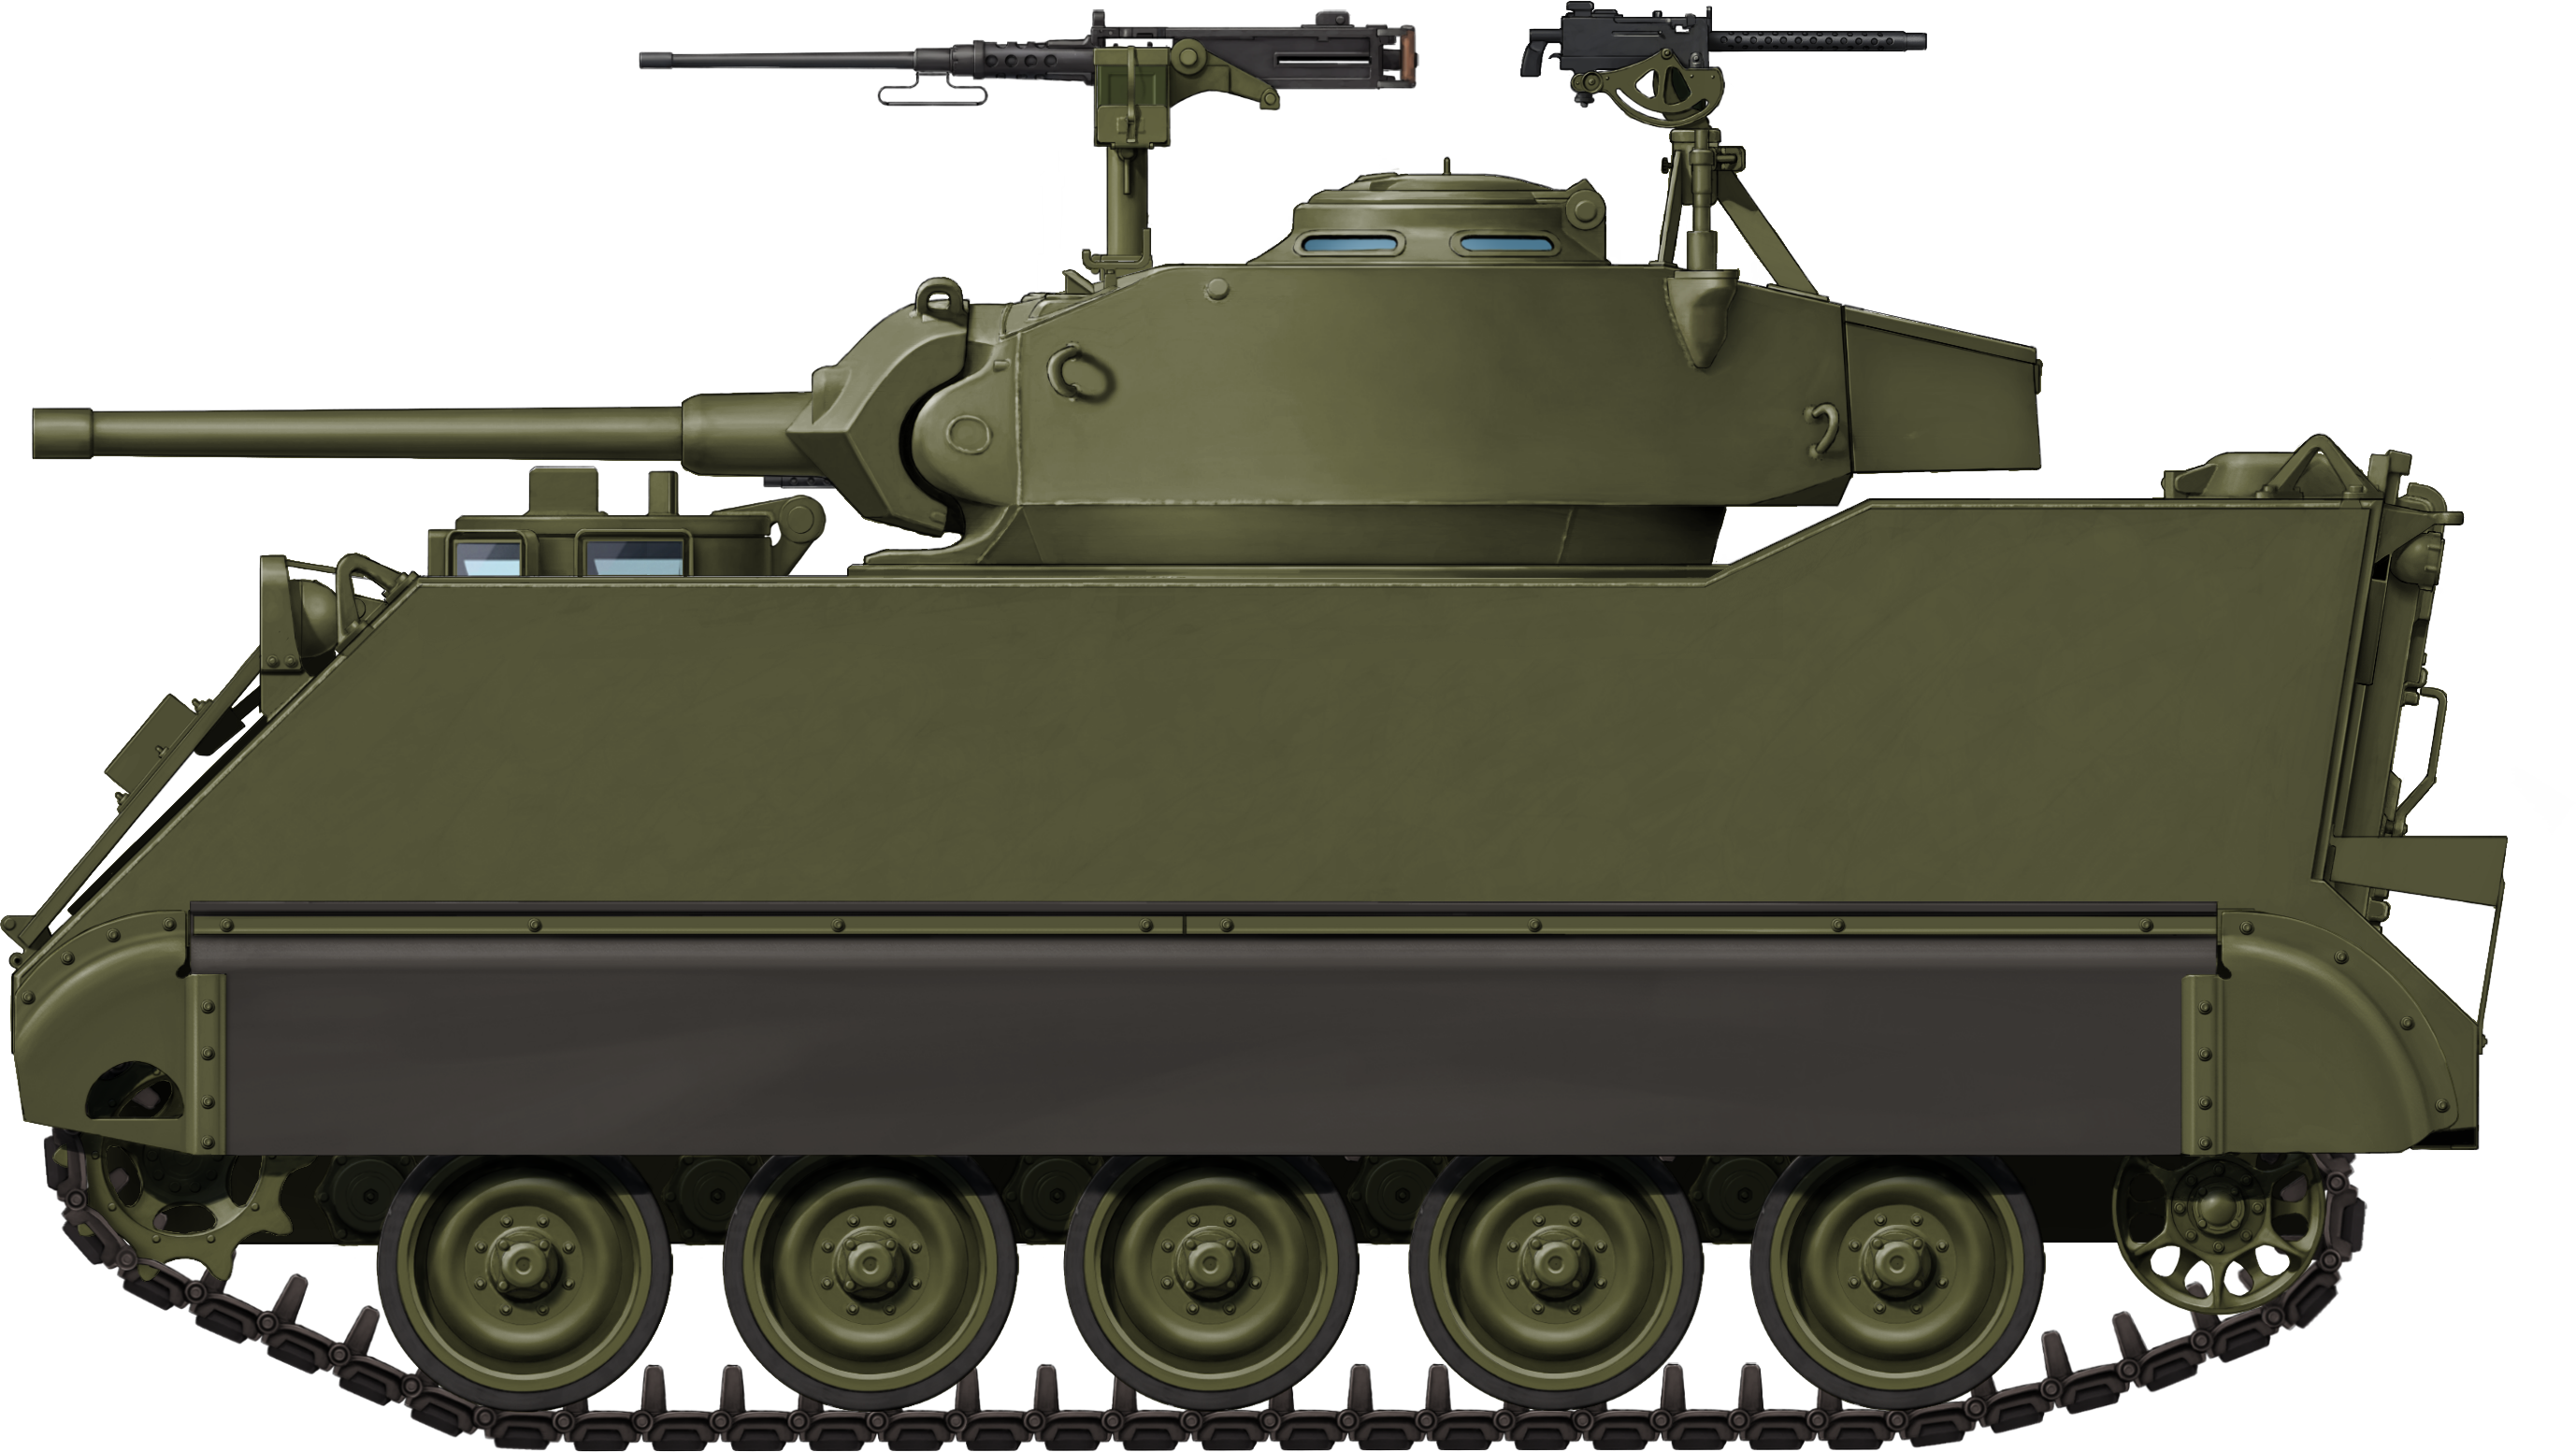 War Thunder - 81 years ago, the FCM.36 tank first appeared within